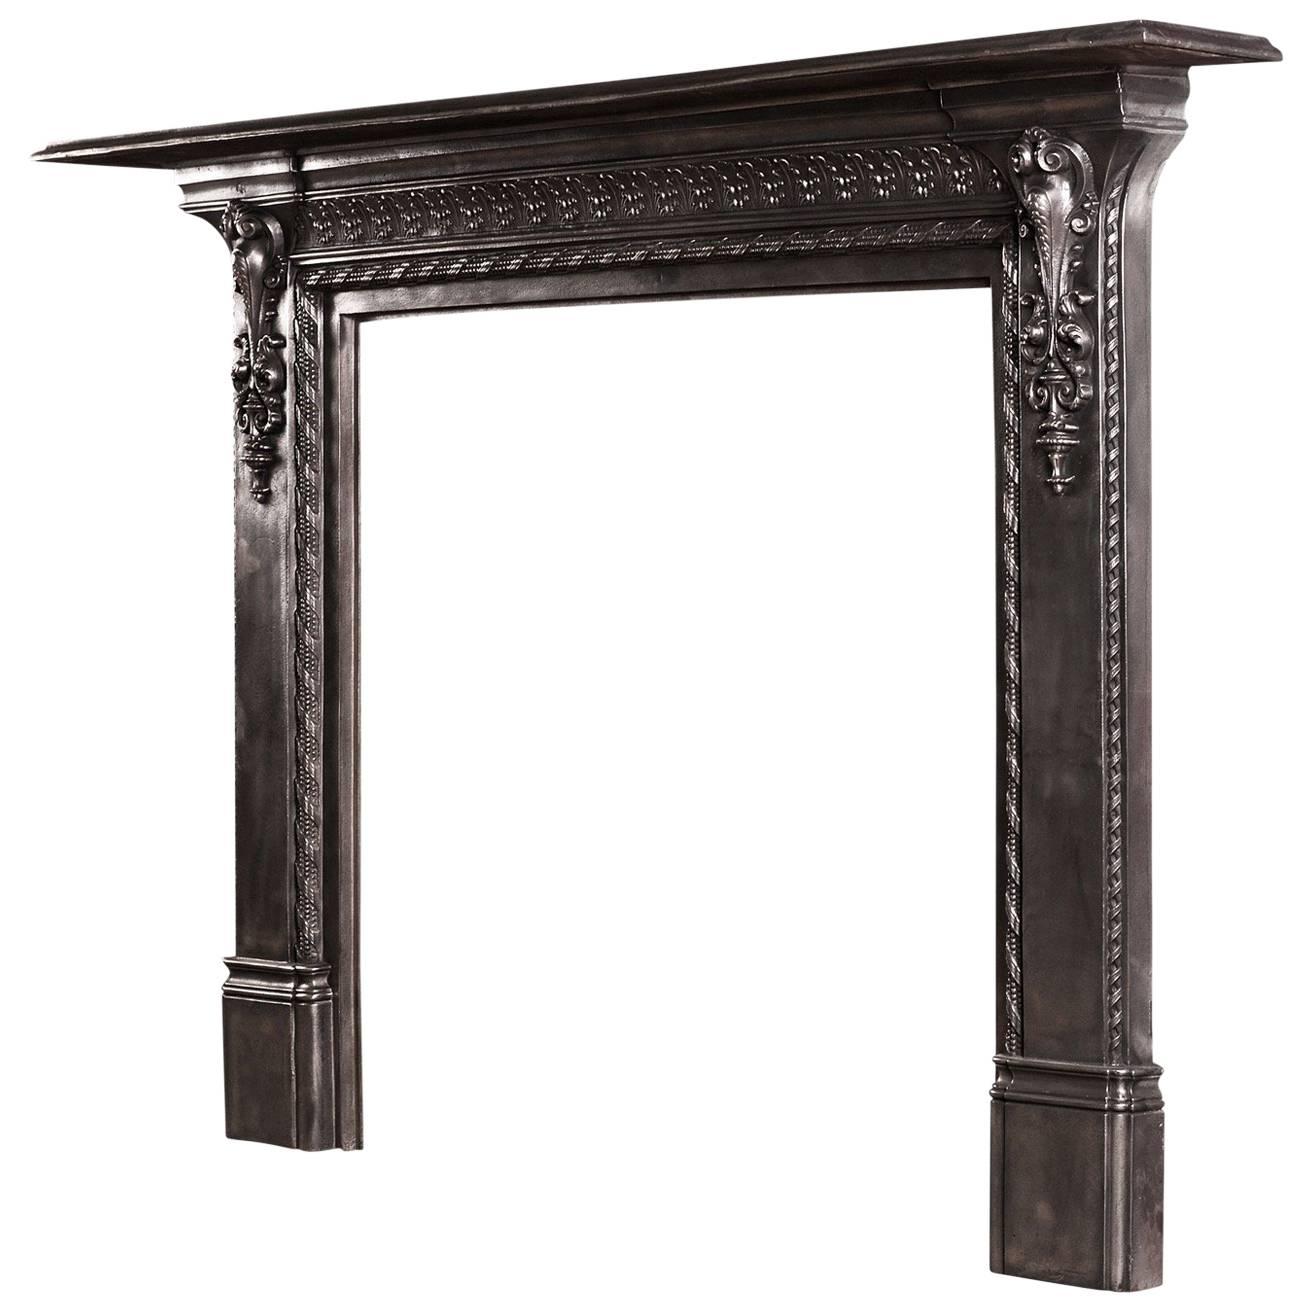 Mid-19th Century English Cast Iron Fireplace For Sale